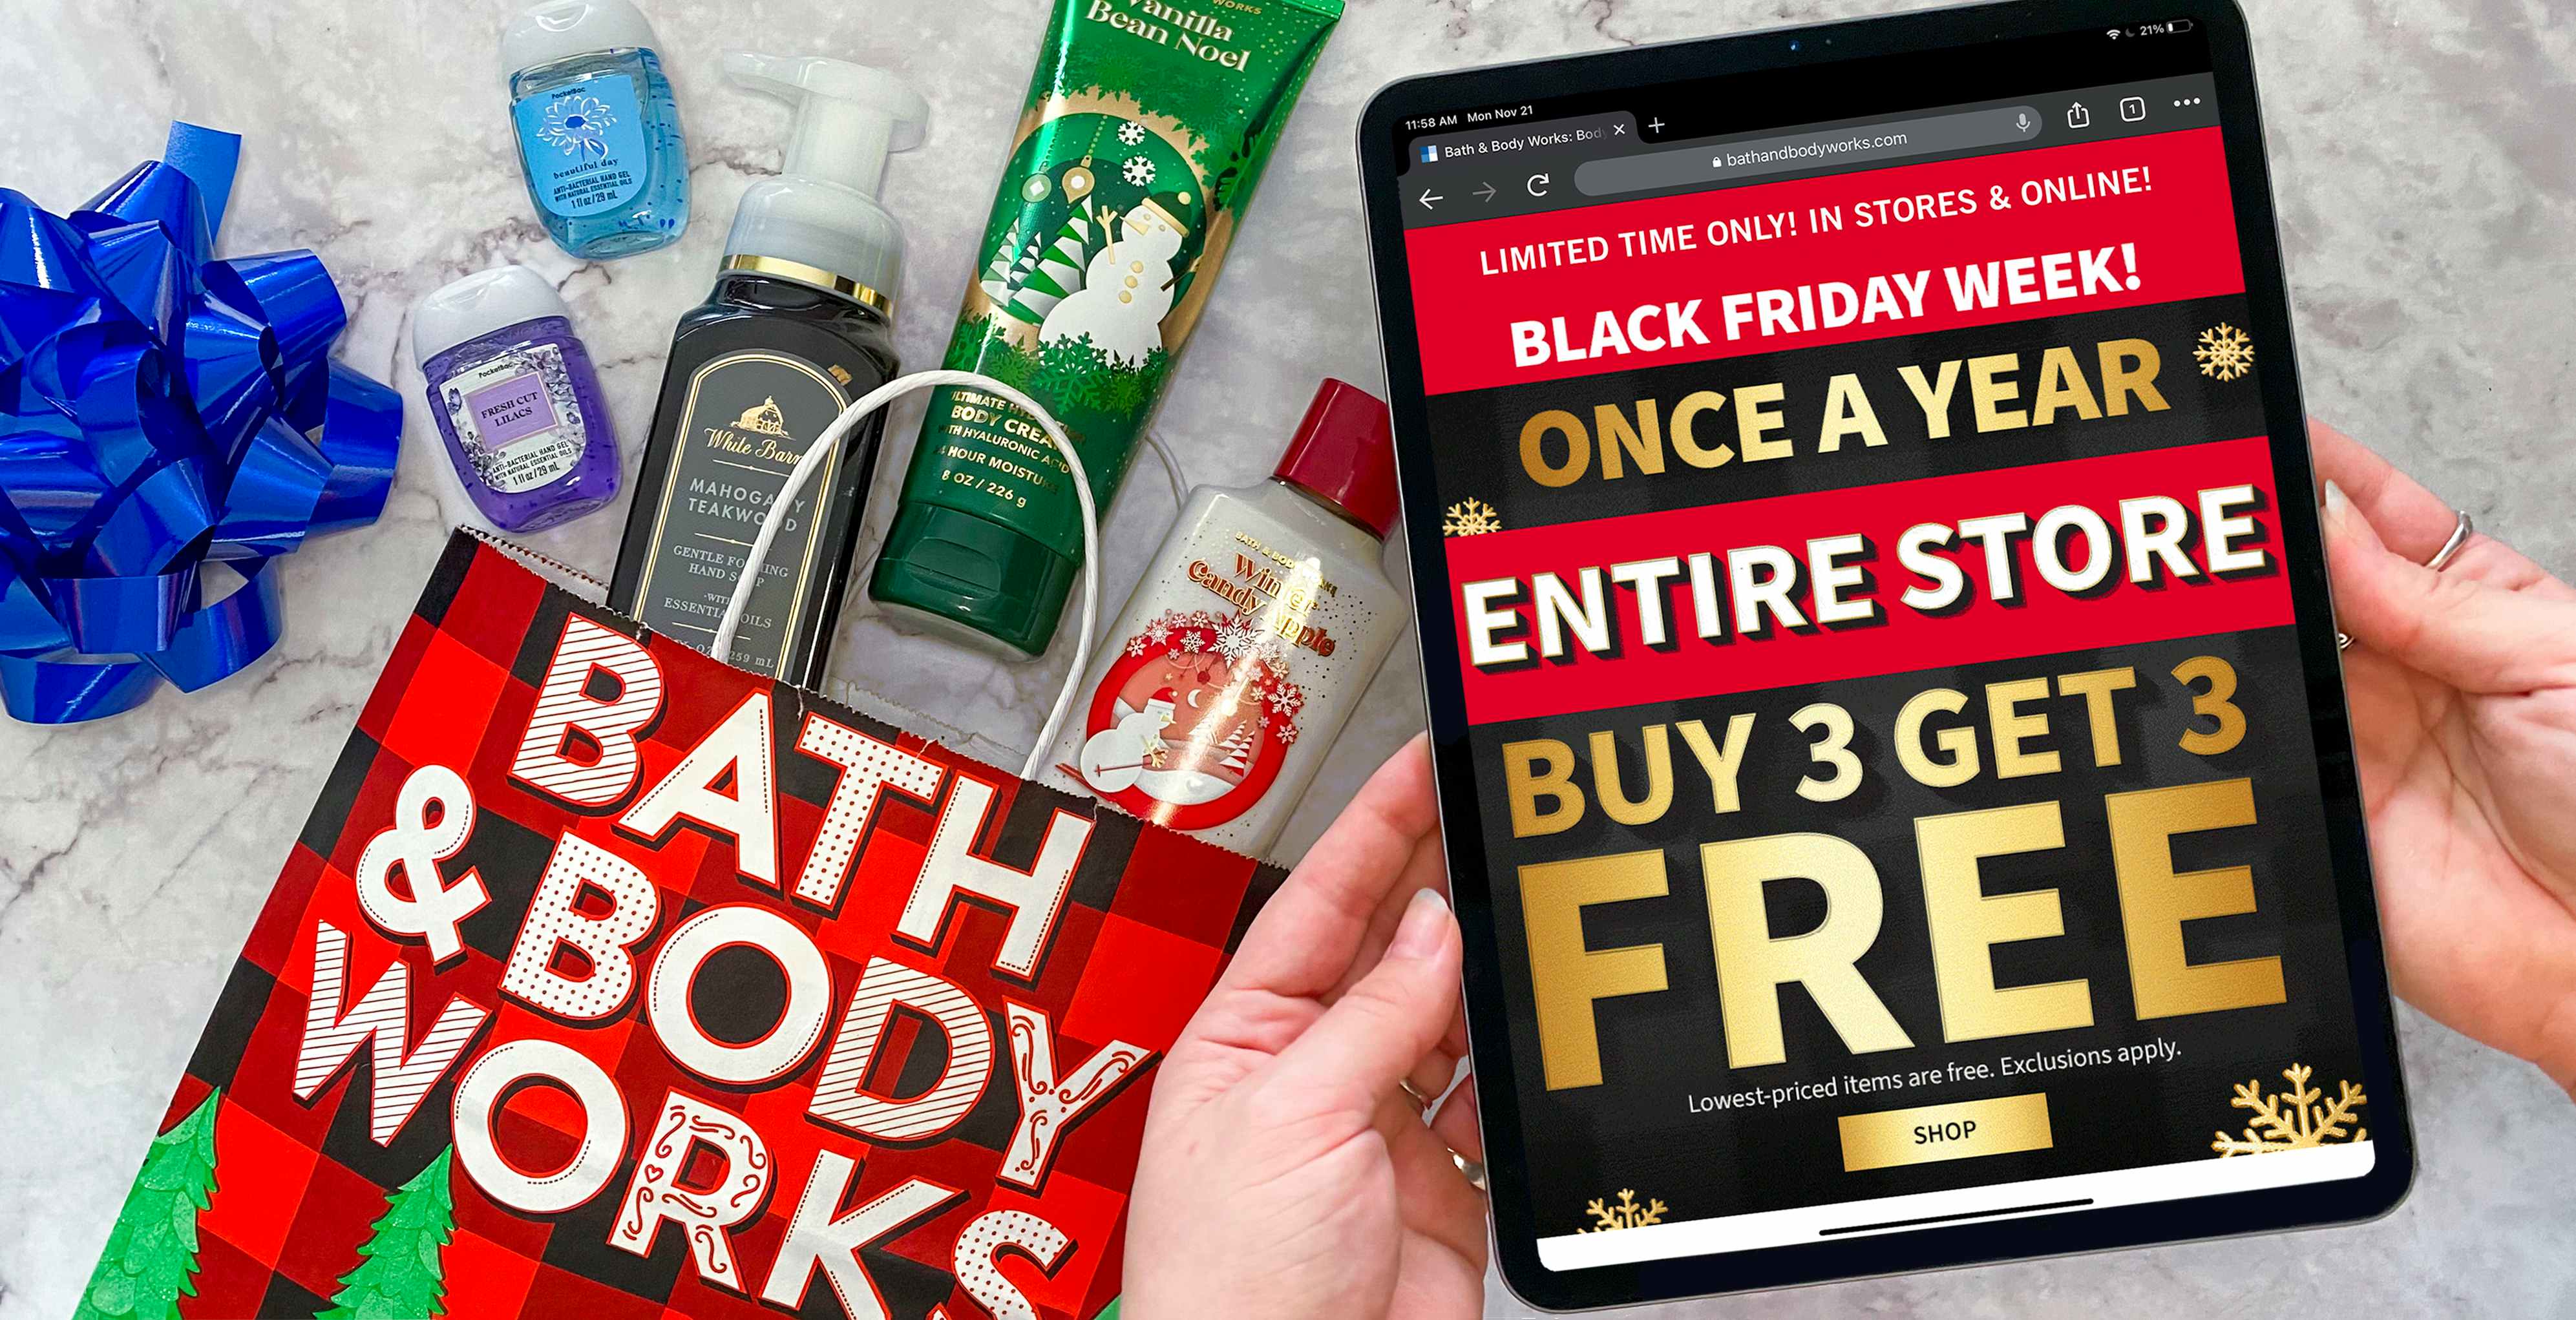 It's Black Friday! Avoid the mall and come shop our holiday